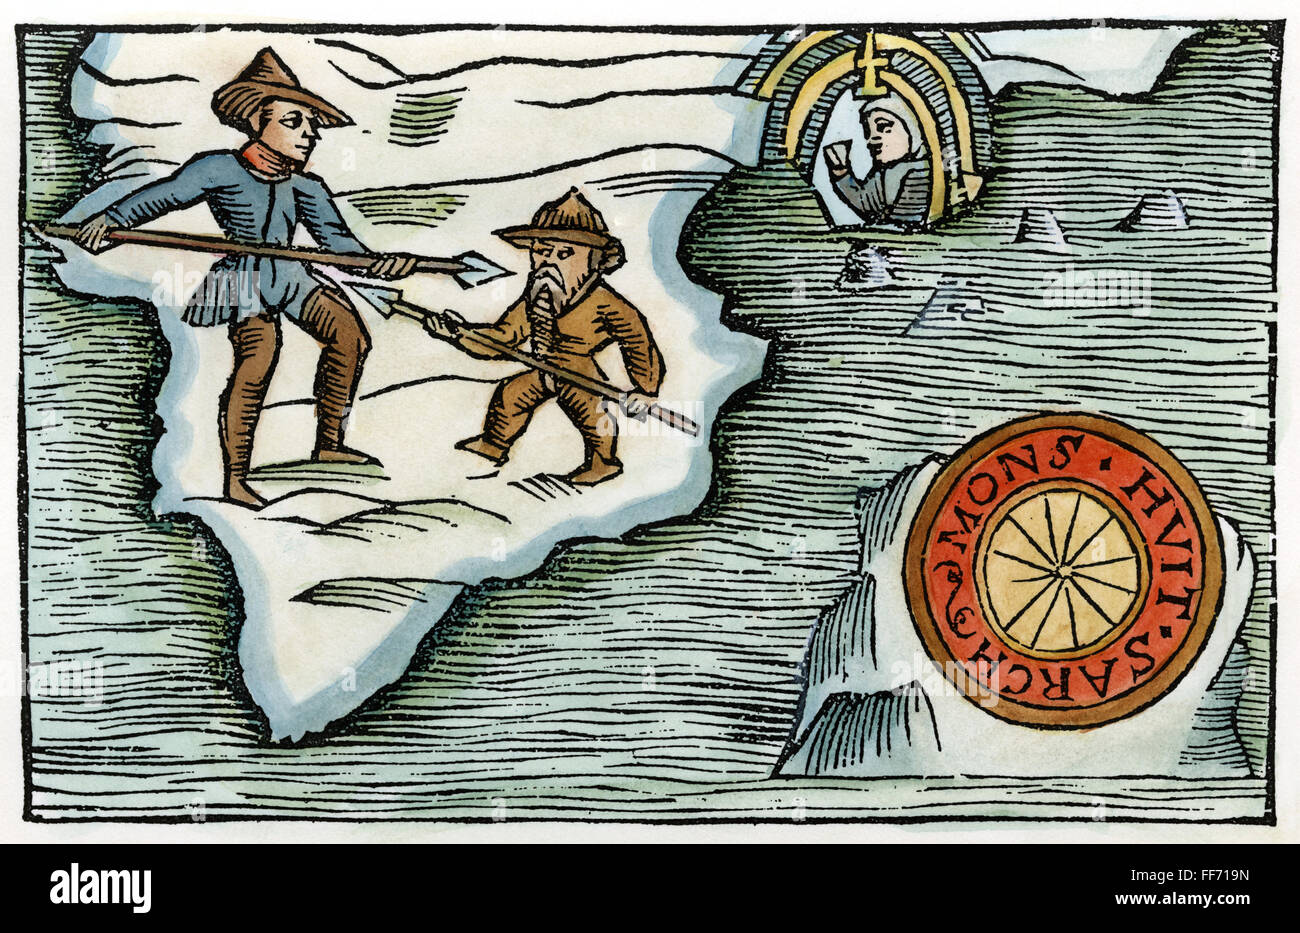 GREENLAND: VIKINGS. /nA Viking fighting with a 'pygmy' or Eskimo of Greenland, and the landmark of Hvitserk. Color woodcut from Olaus Magnus' Hisotria de gentibus septentrionalibus, Rome, 1555. Stock Photo